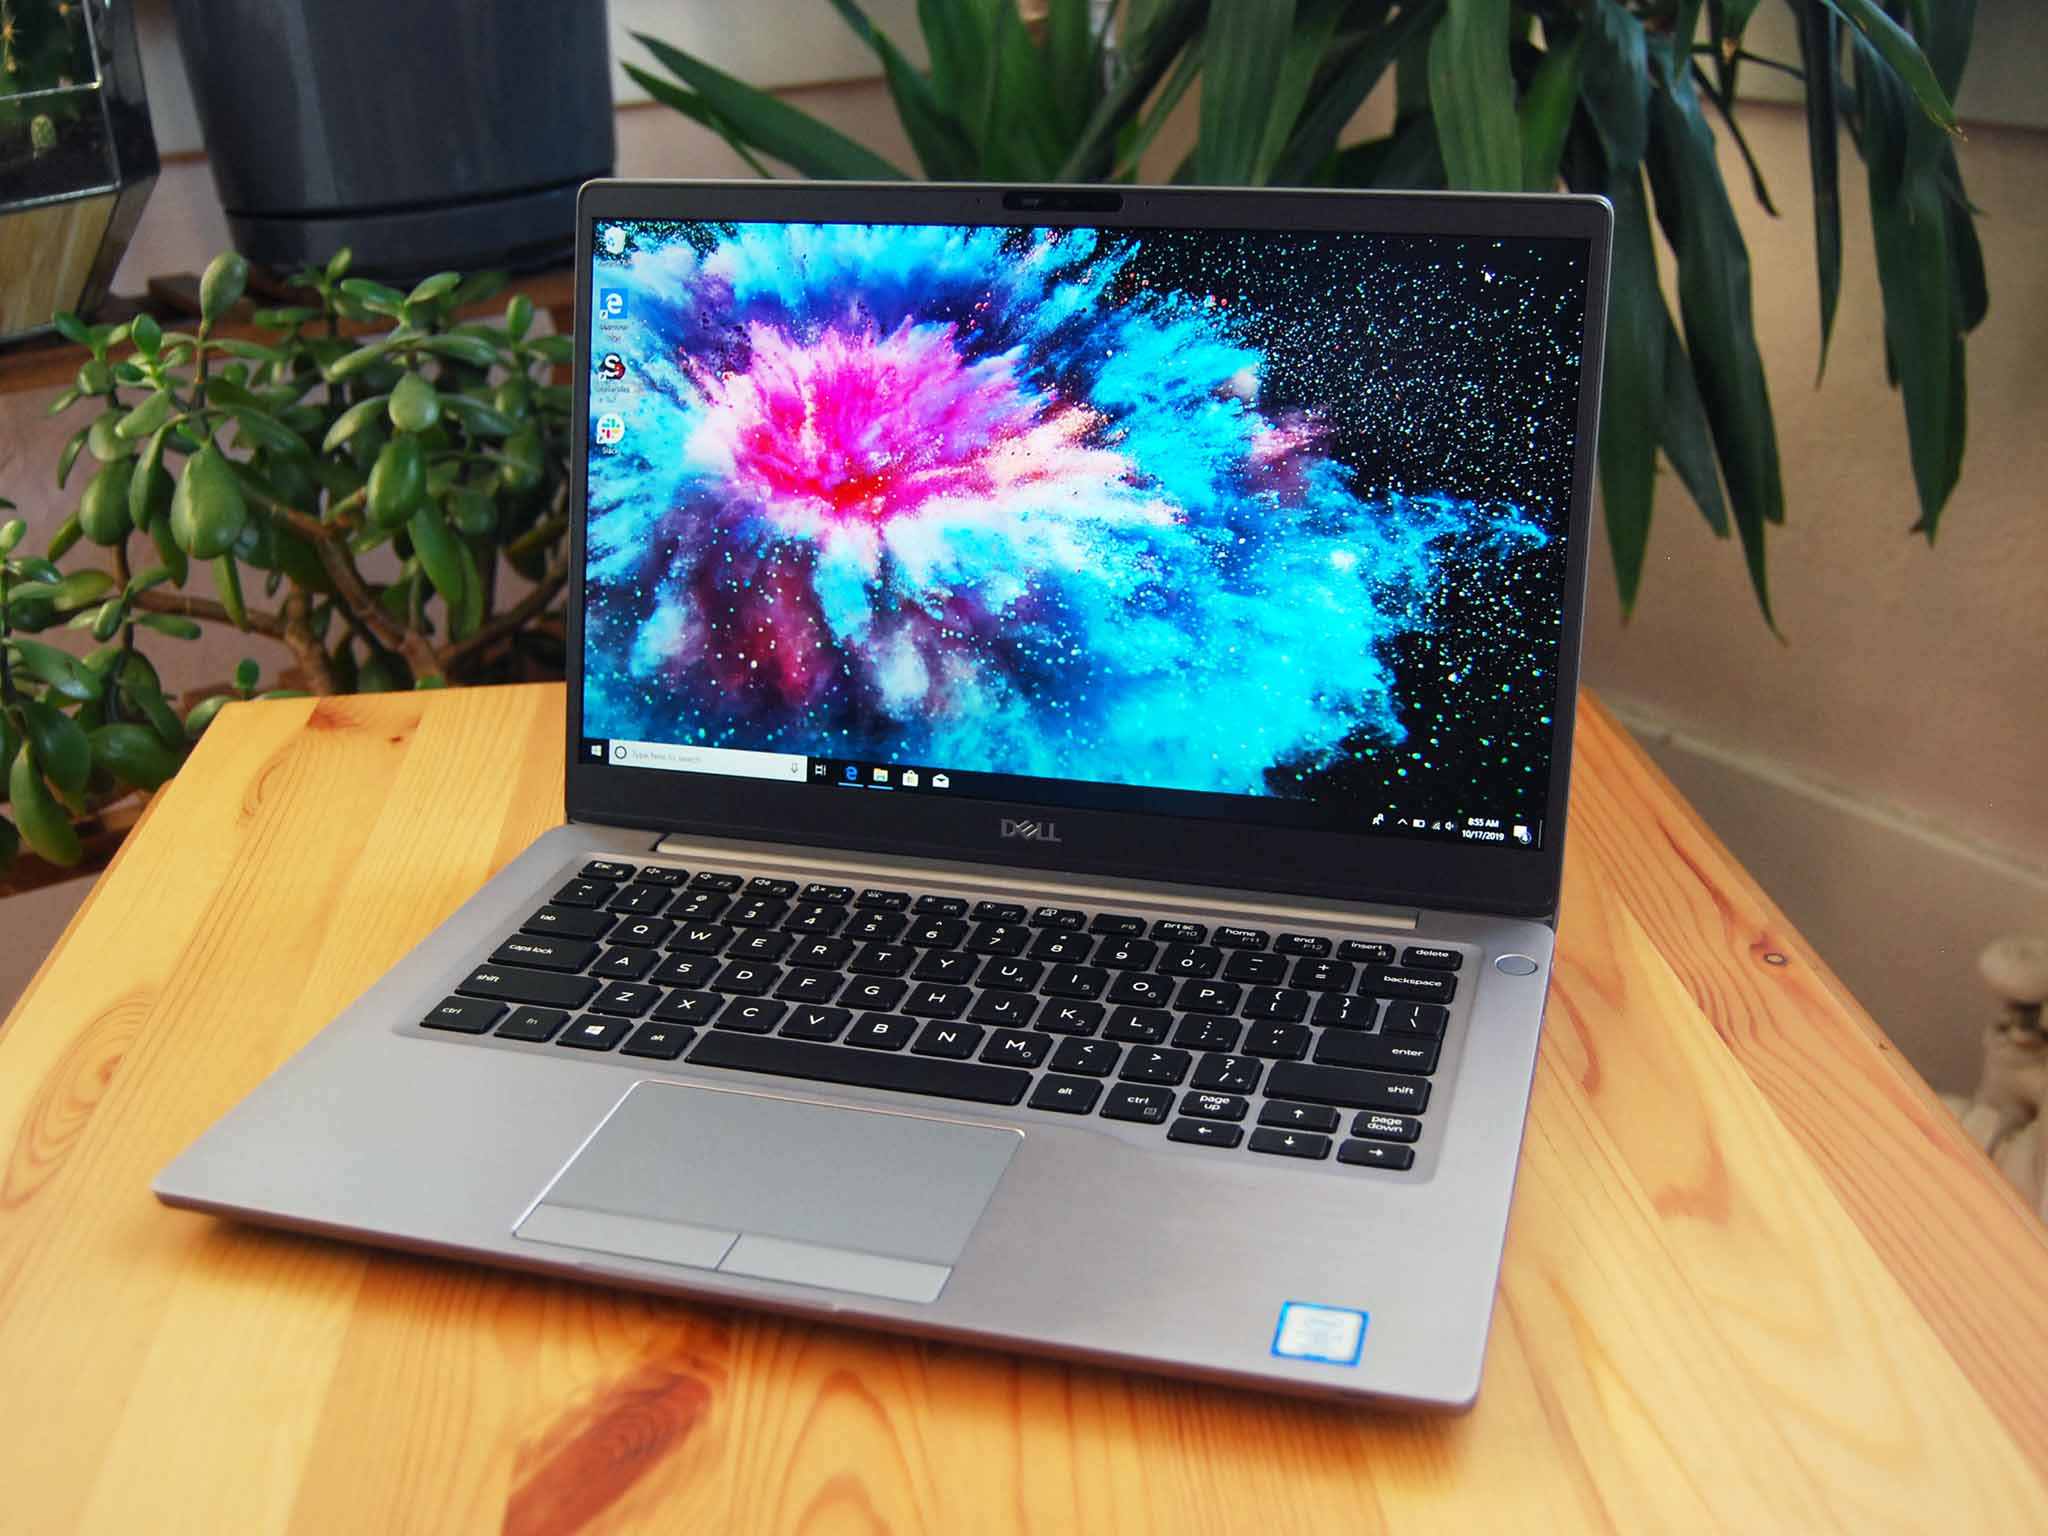 Dell Latitude 13 7300 review: Business laptop with a conducive mix